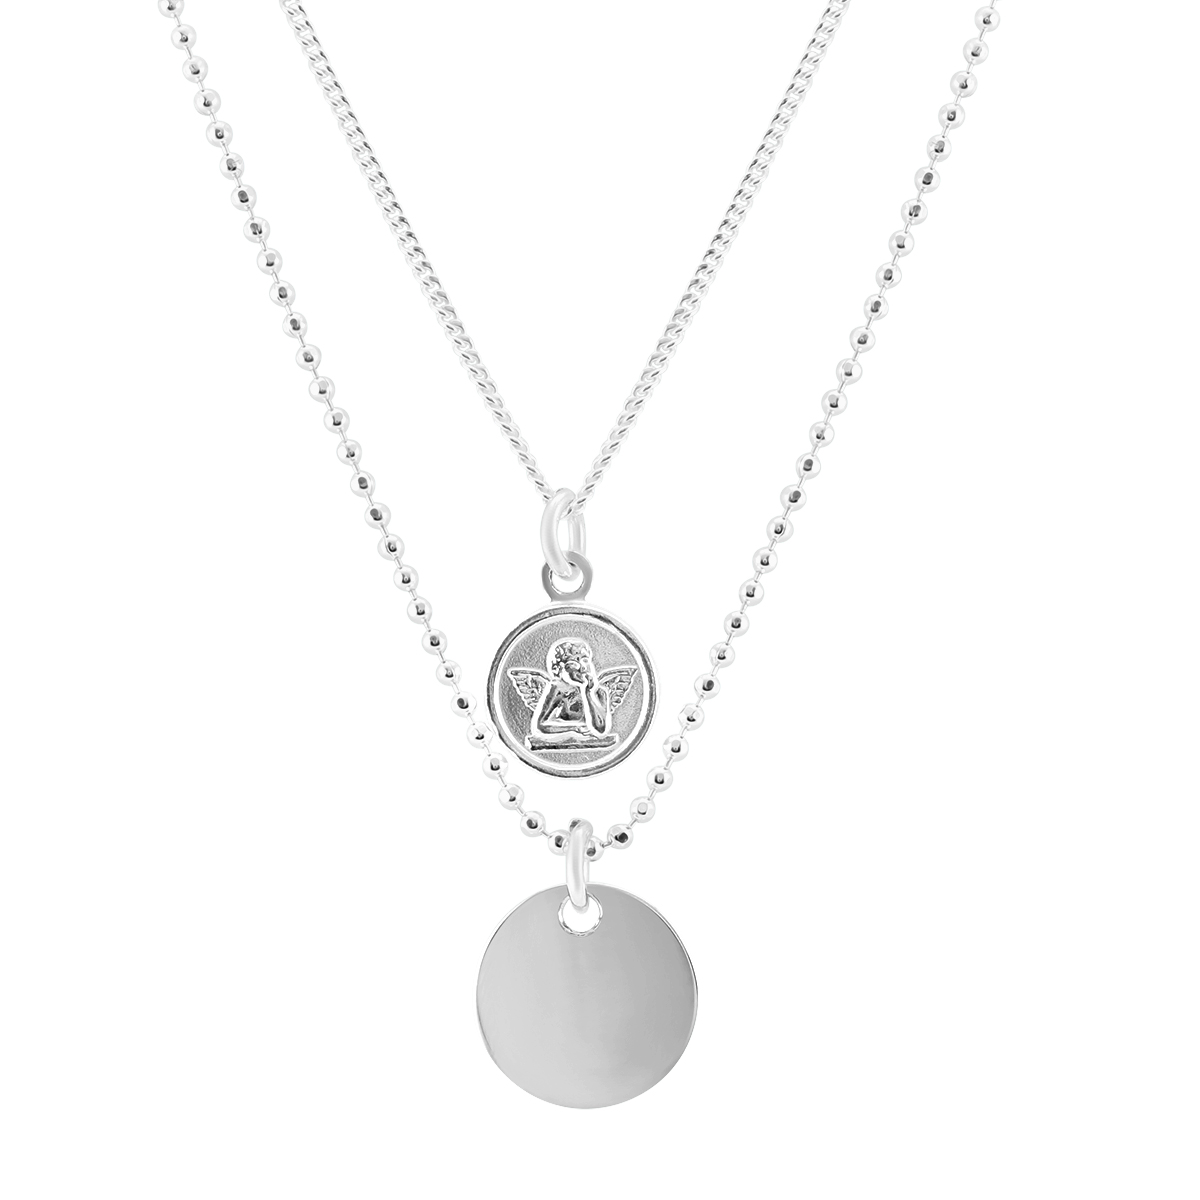 Angel Disc Double Chain Necklace in .925 Sterling Silver